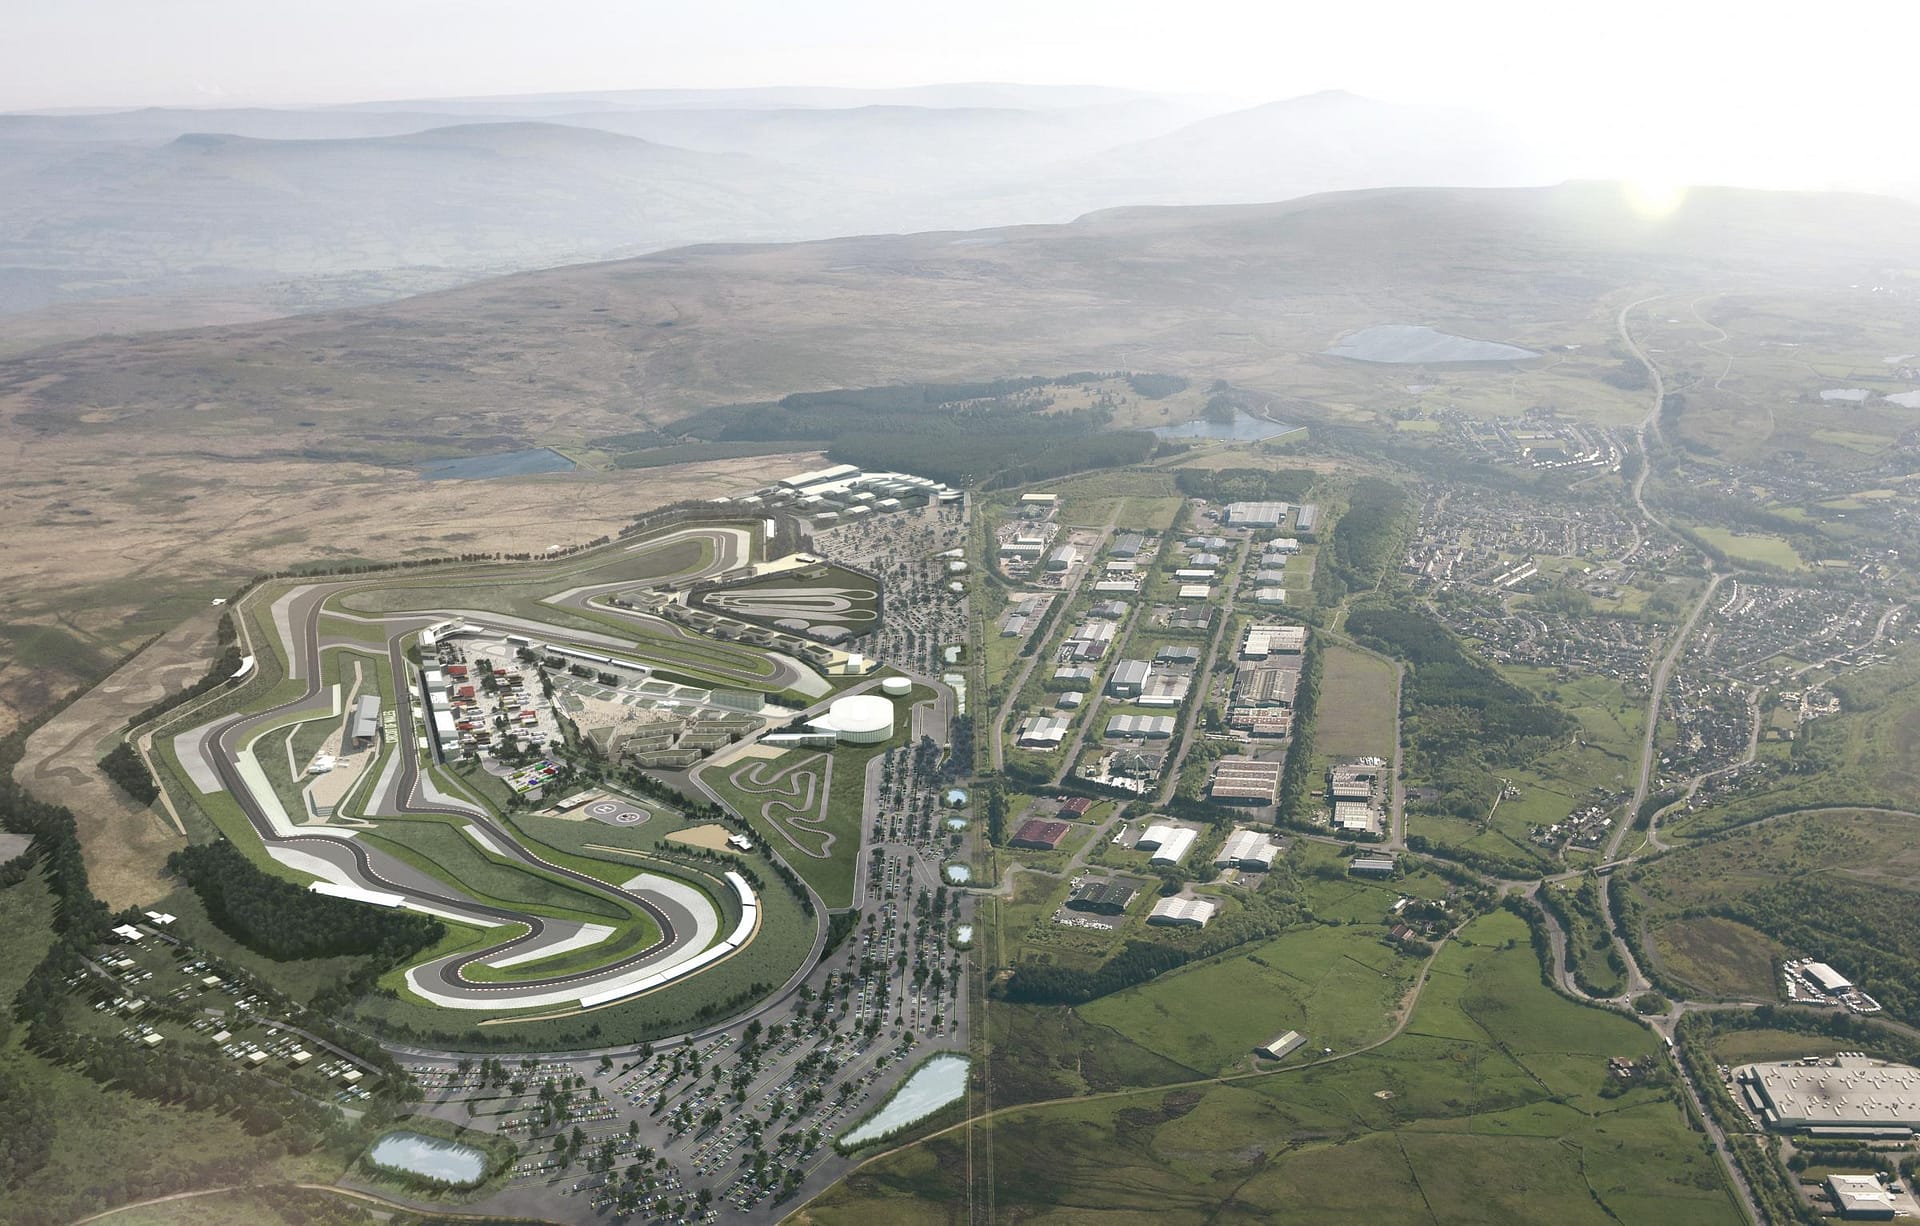 Circuit of Wales